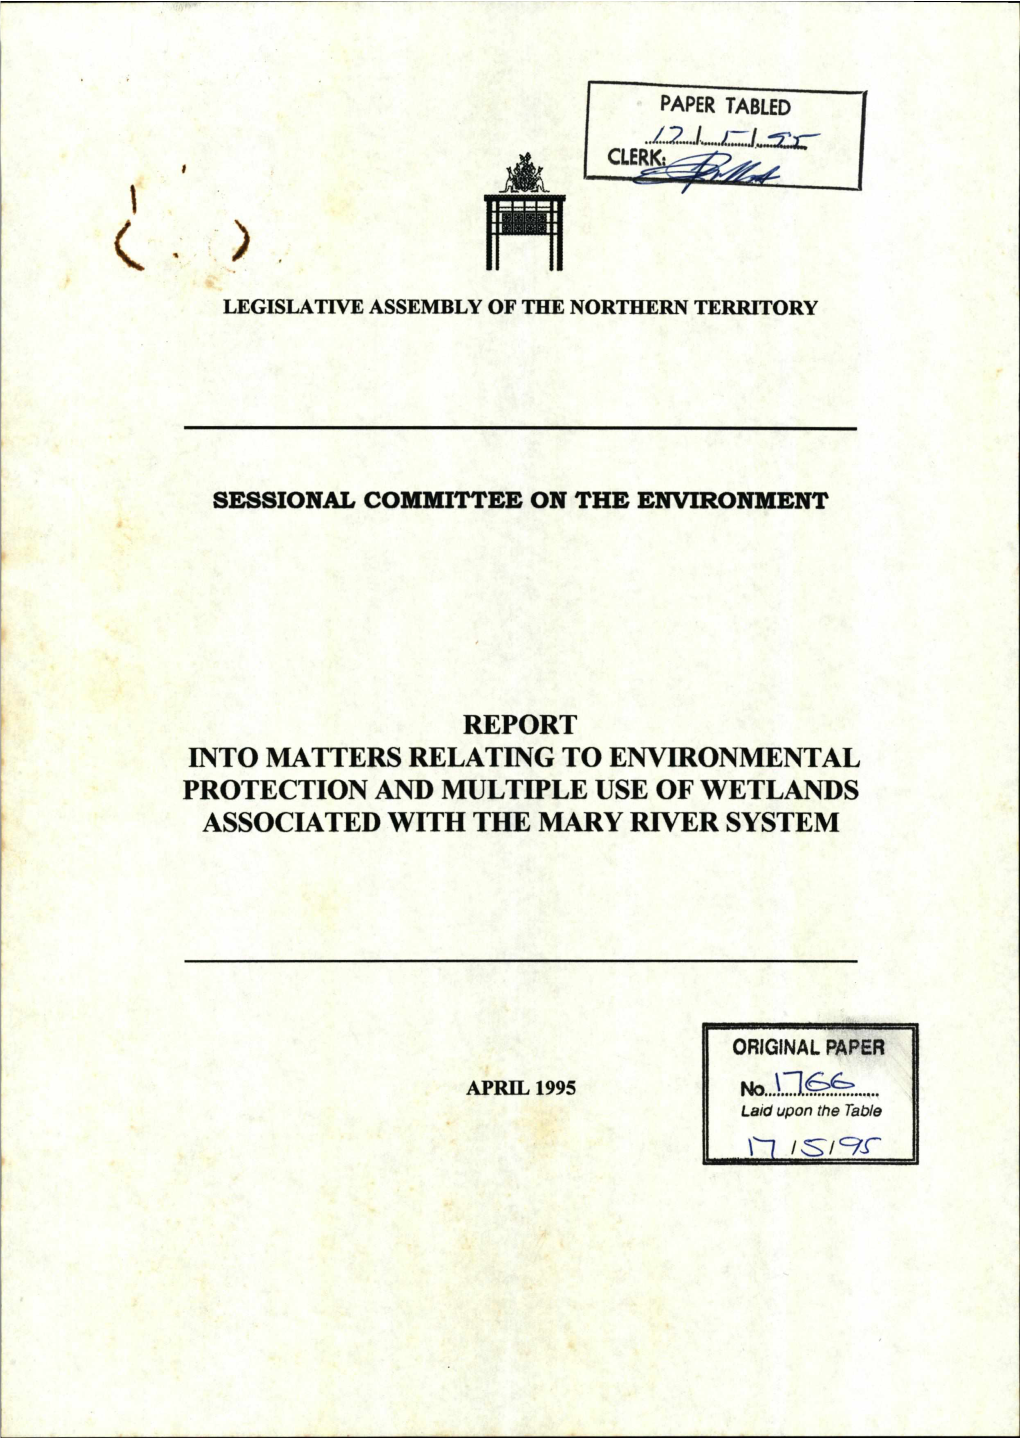 Report Into Matters Relating to Environmental Protection and Multiple Use of Wetlands Associated with the Mary River System